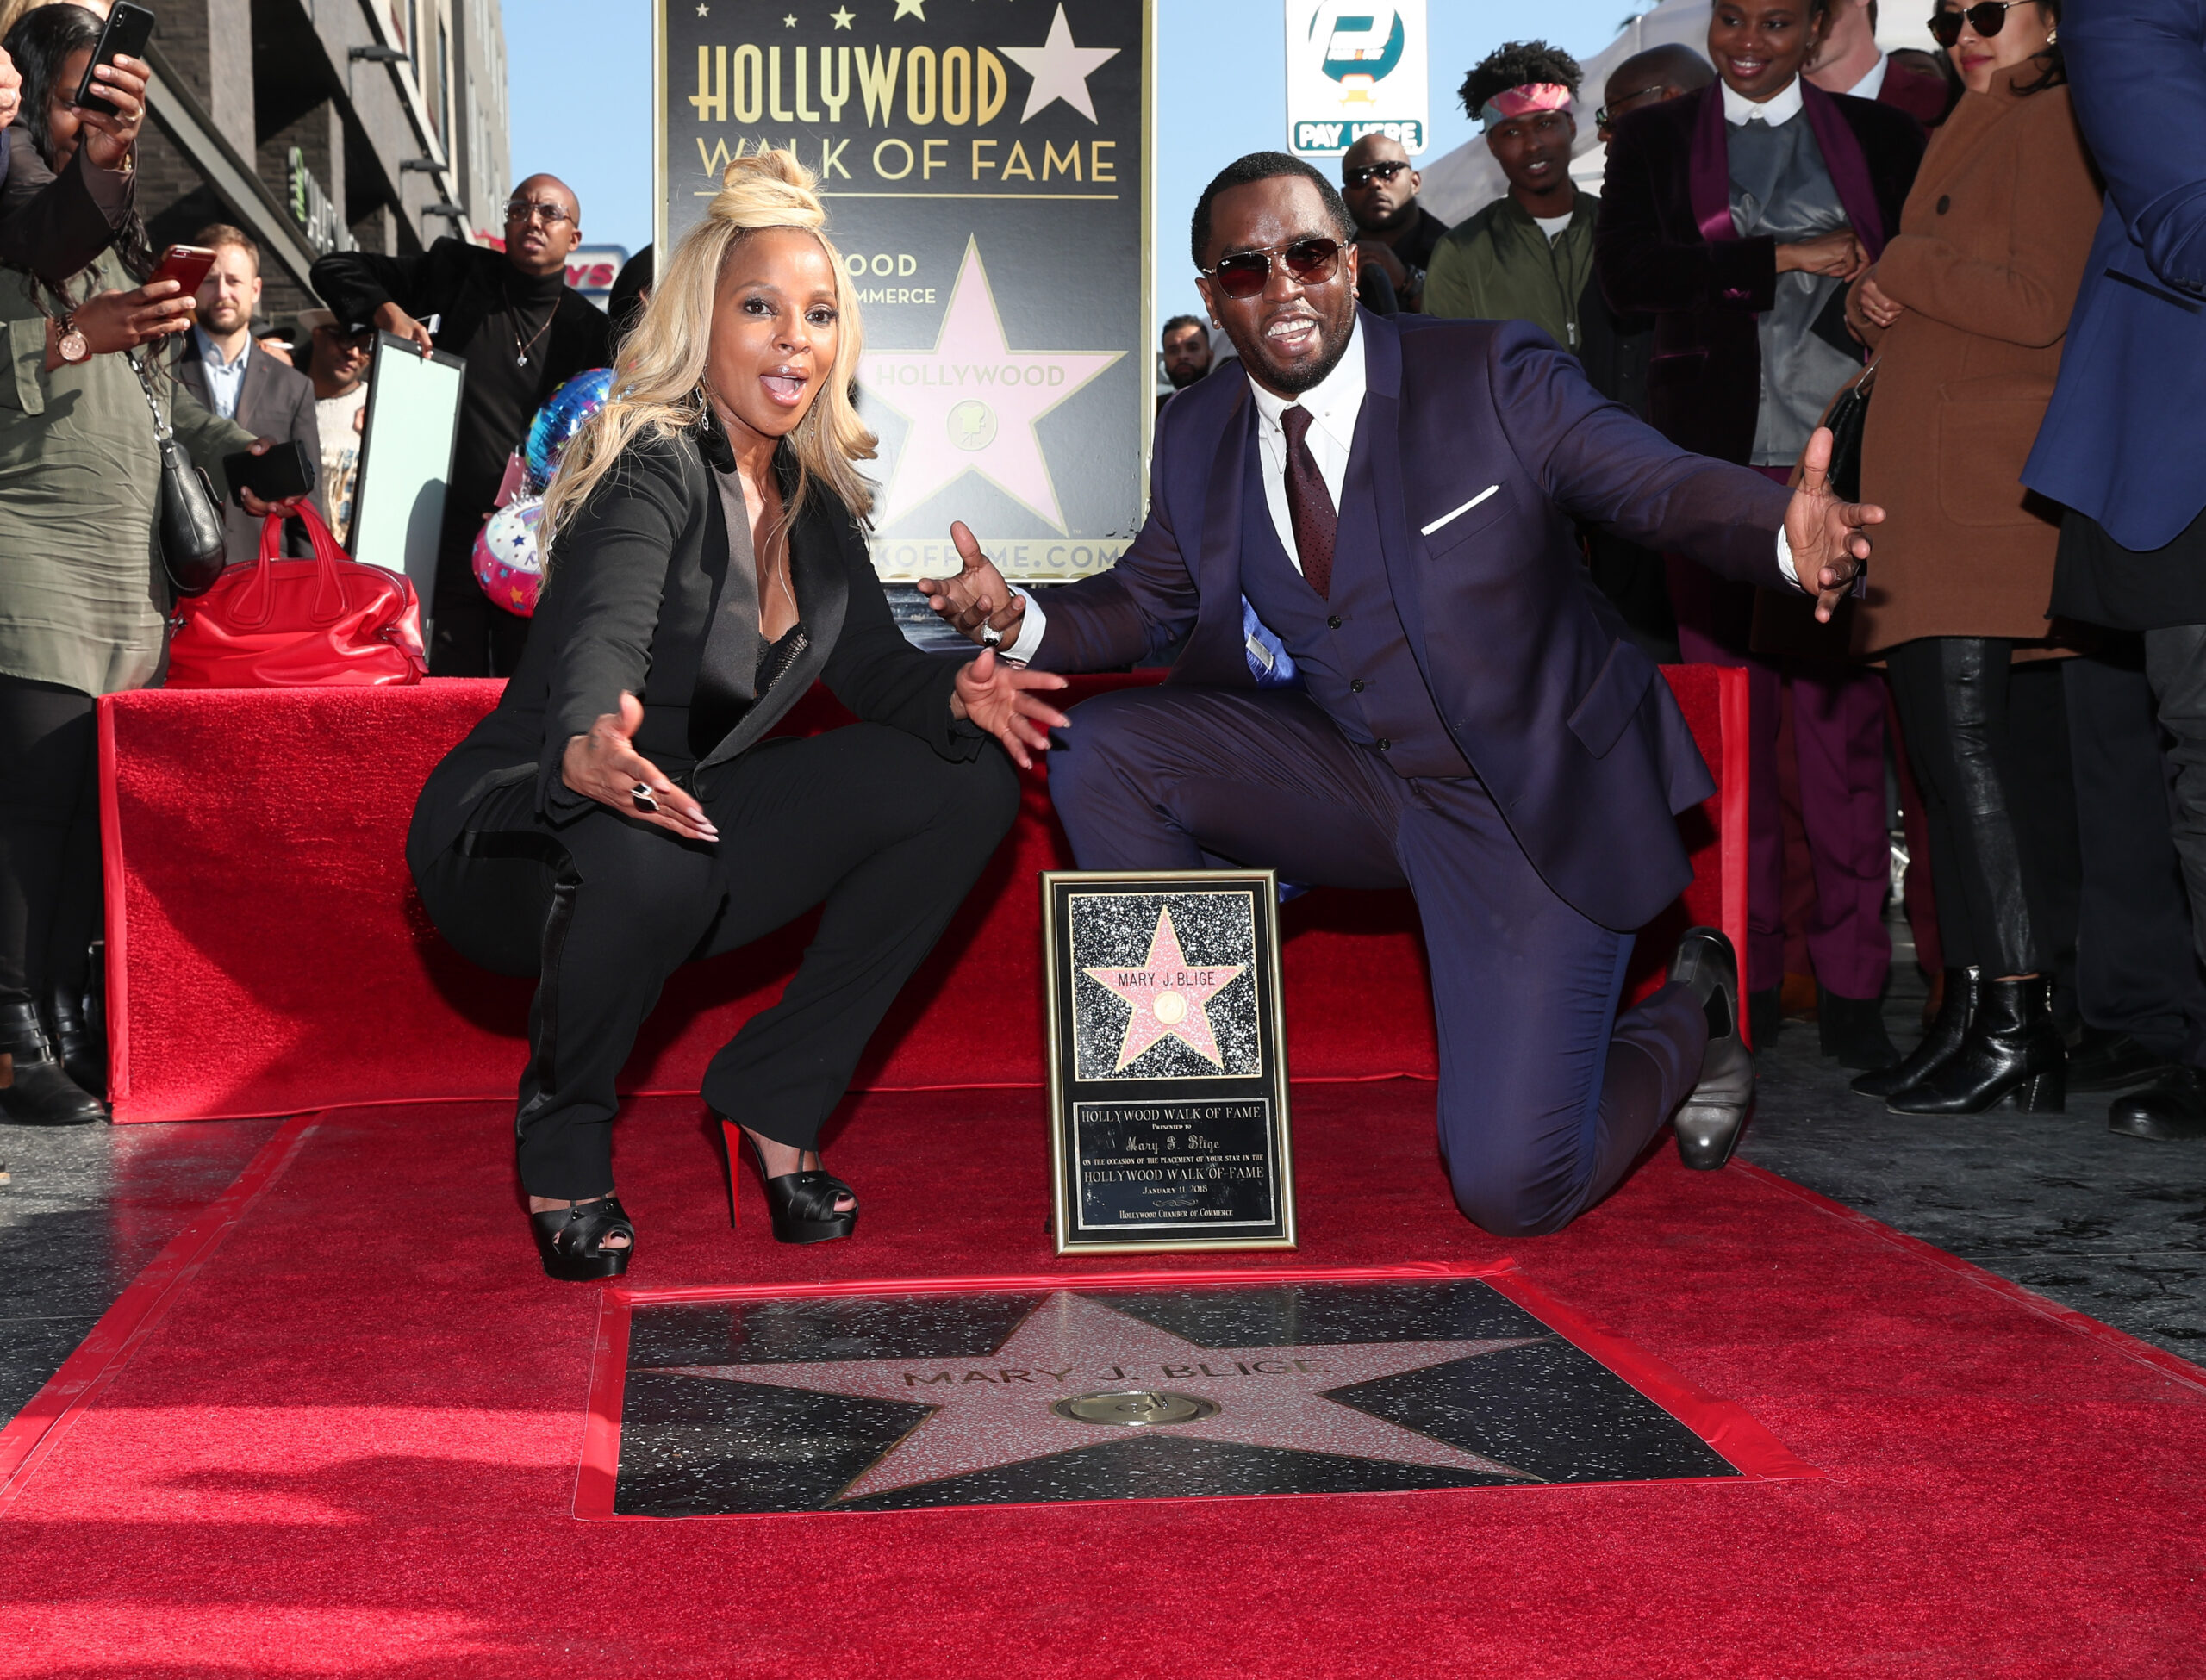 Mary J. Blige and Diddy's Dance Video Causes a Frenzy on Social Media